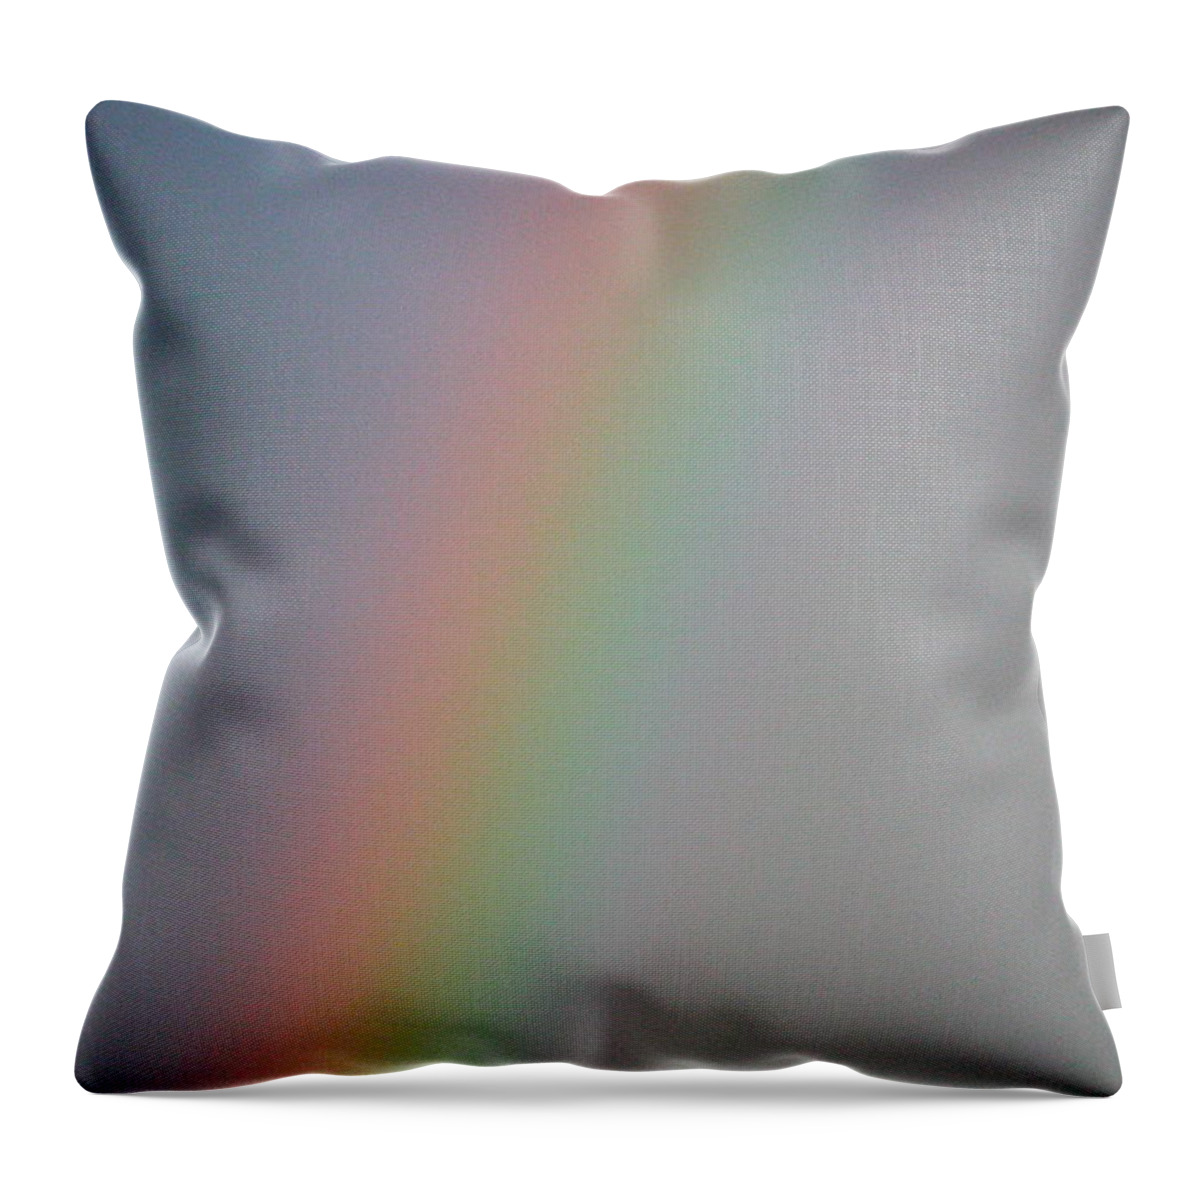 Rainbow Throw Pillow featuring the photograph Just A Piece by Diana Hatcher